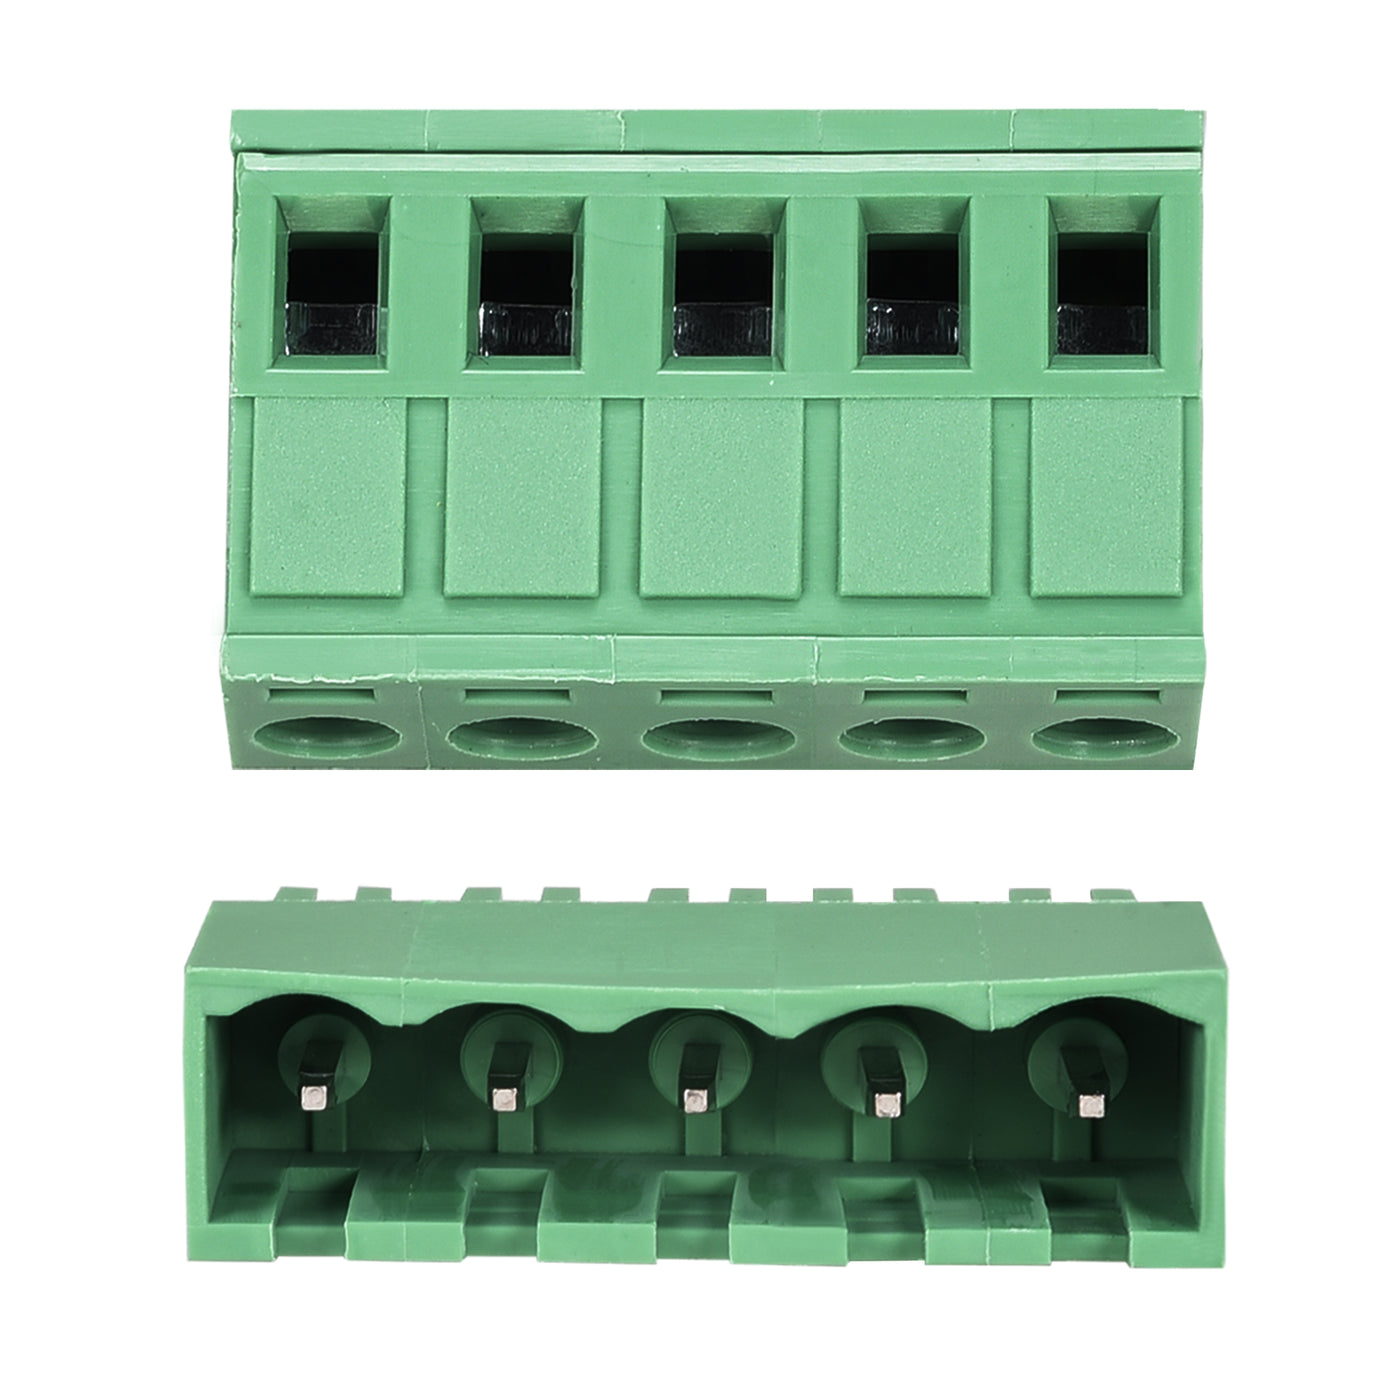 uxcell Uxcell 5 Pin 5.08mm Pitch Male Female PCB Screw Terminal Block 5 Sets